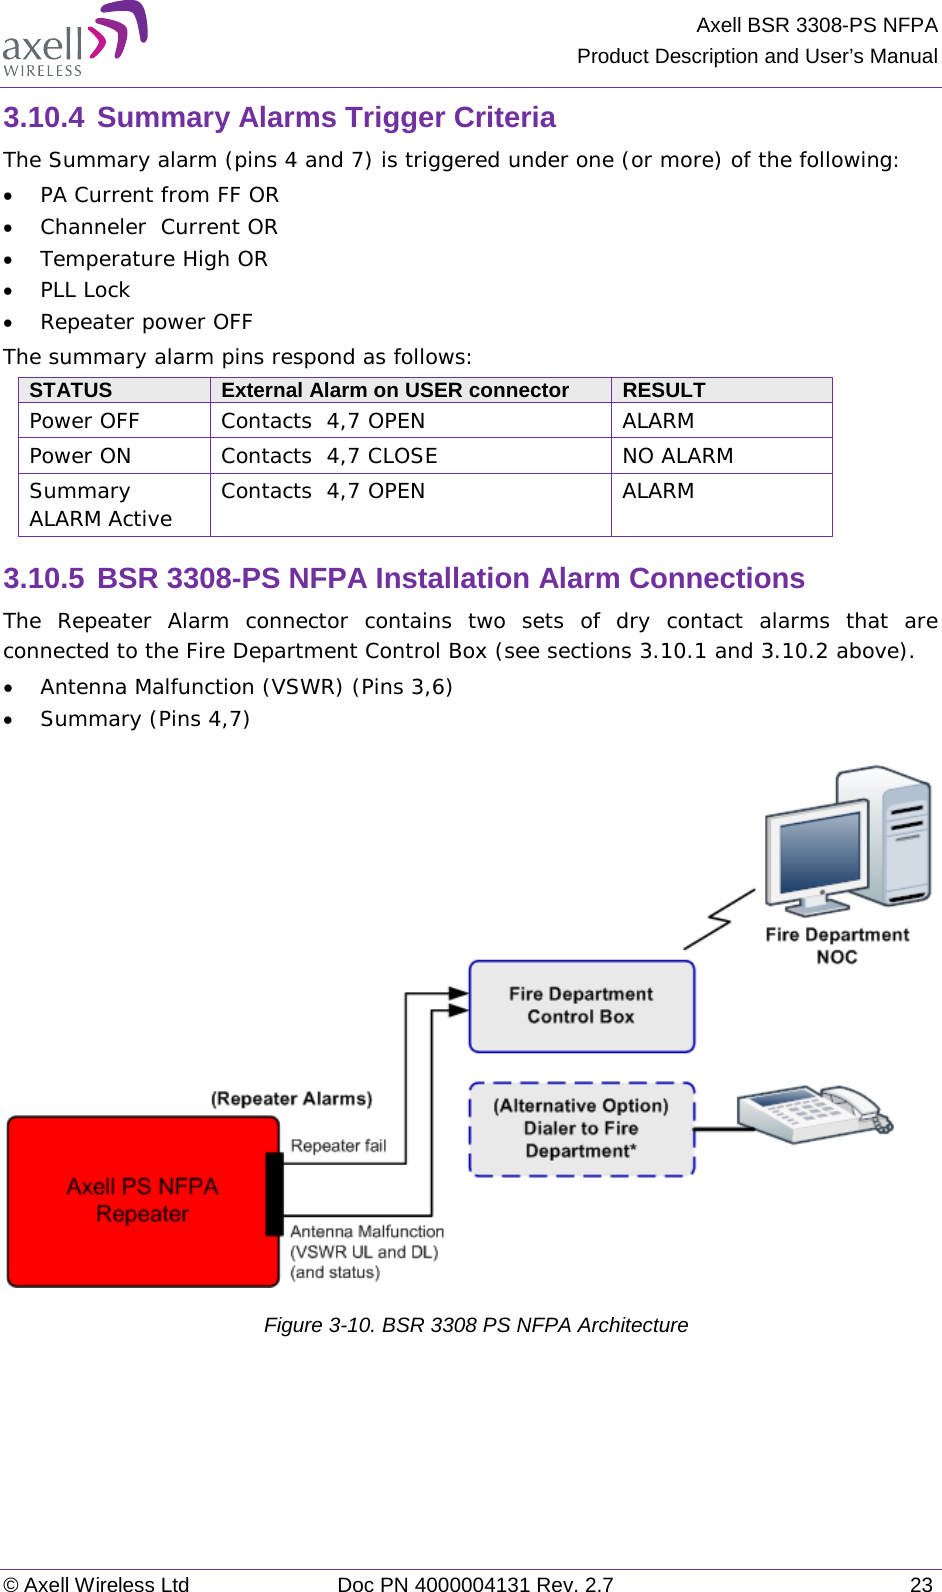 Axell BSR 3308-PS NFPA Product Description and User’s Manual © Axell Wireless Ltd Doc PN 4000004131 Rev. 2.7 23 3.10.4 Summary Alarms Trigger Criteria The Summary alarm (pins 4 and 7) is triggered under one (or more) of the following: • PA Current from FF OR • Channeler  Current OR • Temperature High OR • PLL Lock • Repeater power OFF The summary alarm pins respond as follows: STATUS External Alarm on USER connector RESULT Power OFF  Contacts  4,7 OPEN  ALARM Power ON  Contacts  4,7 CLOSE  NO ALARM  Summary ALARM Active  Contacts  4,7 OPEN  ALARM  3.10.5 BSR 3308-PS NFPA Installation Alarm Connections The  Repeater Alarm connector contains two sets of dry contact alarms that are connected to the Fire Department Control Box (see sections  3.10.1 and  3.10.2 above). • Antenna Malfunction (VSWR) (Pins 3,6) • Summary (Pins 4,7)   Figure  3-10. BSR 3308 PS NFPA Architecture    